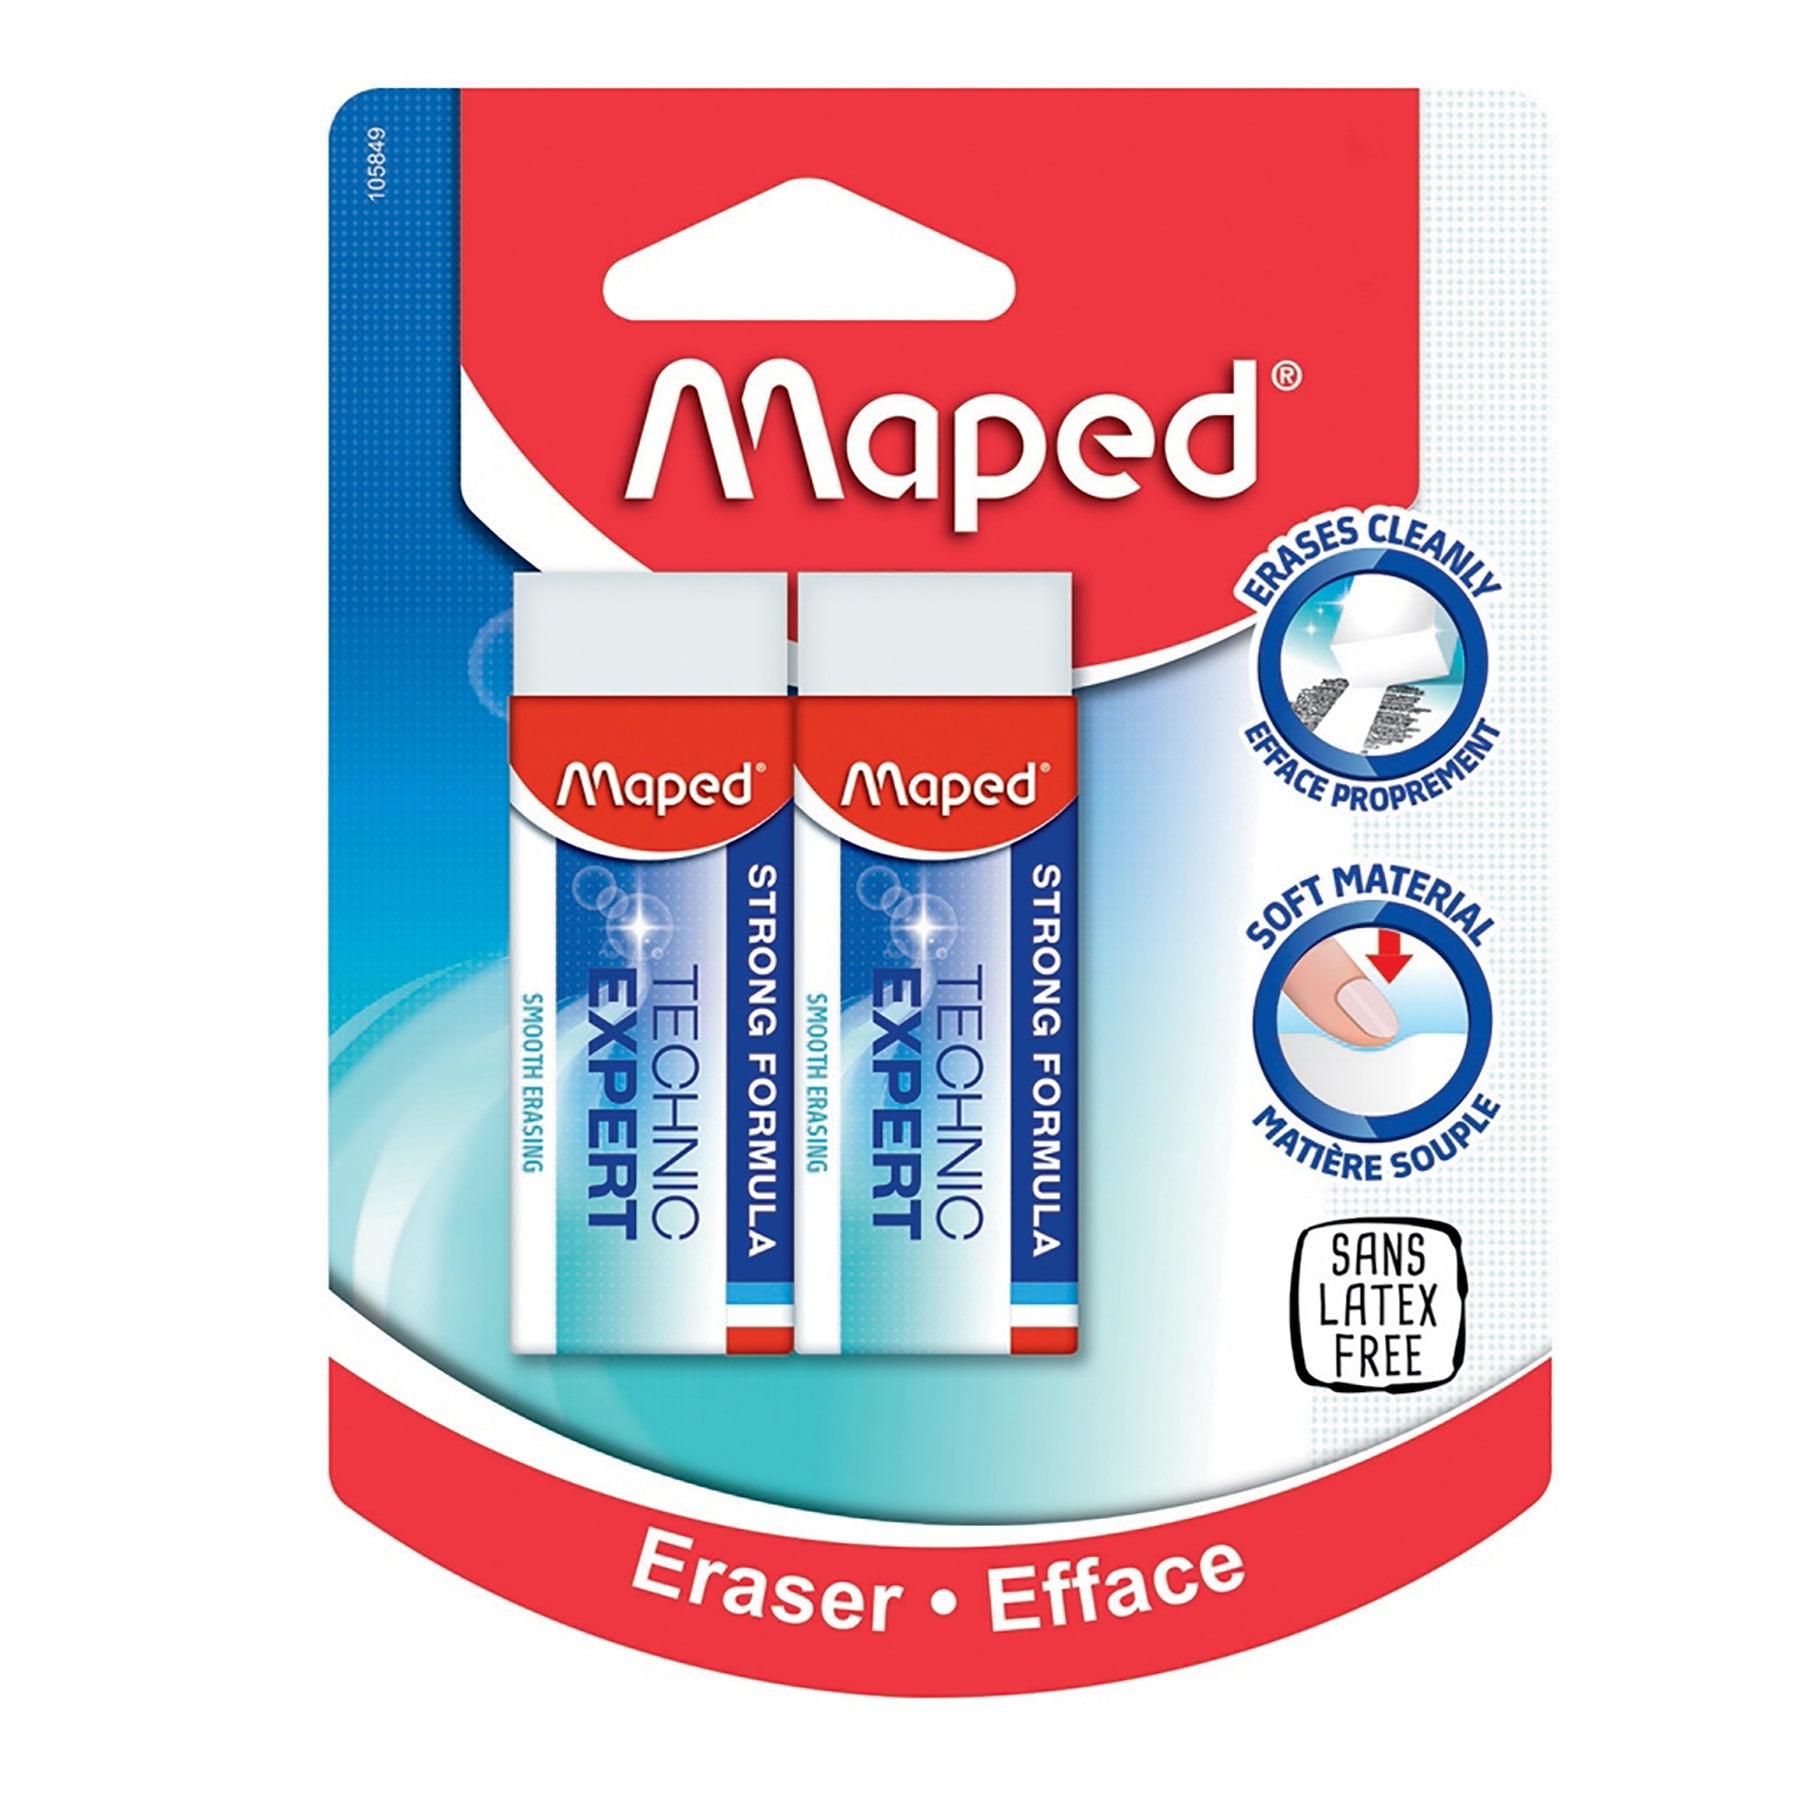 Maped 2 Expert White Erasers 2.4in